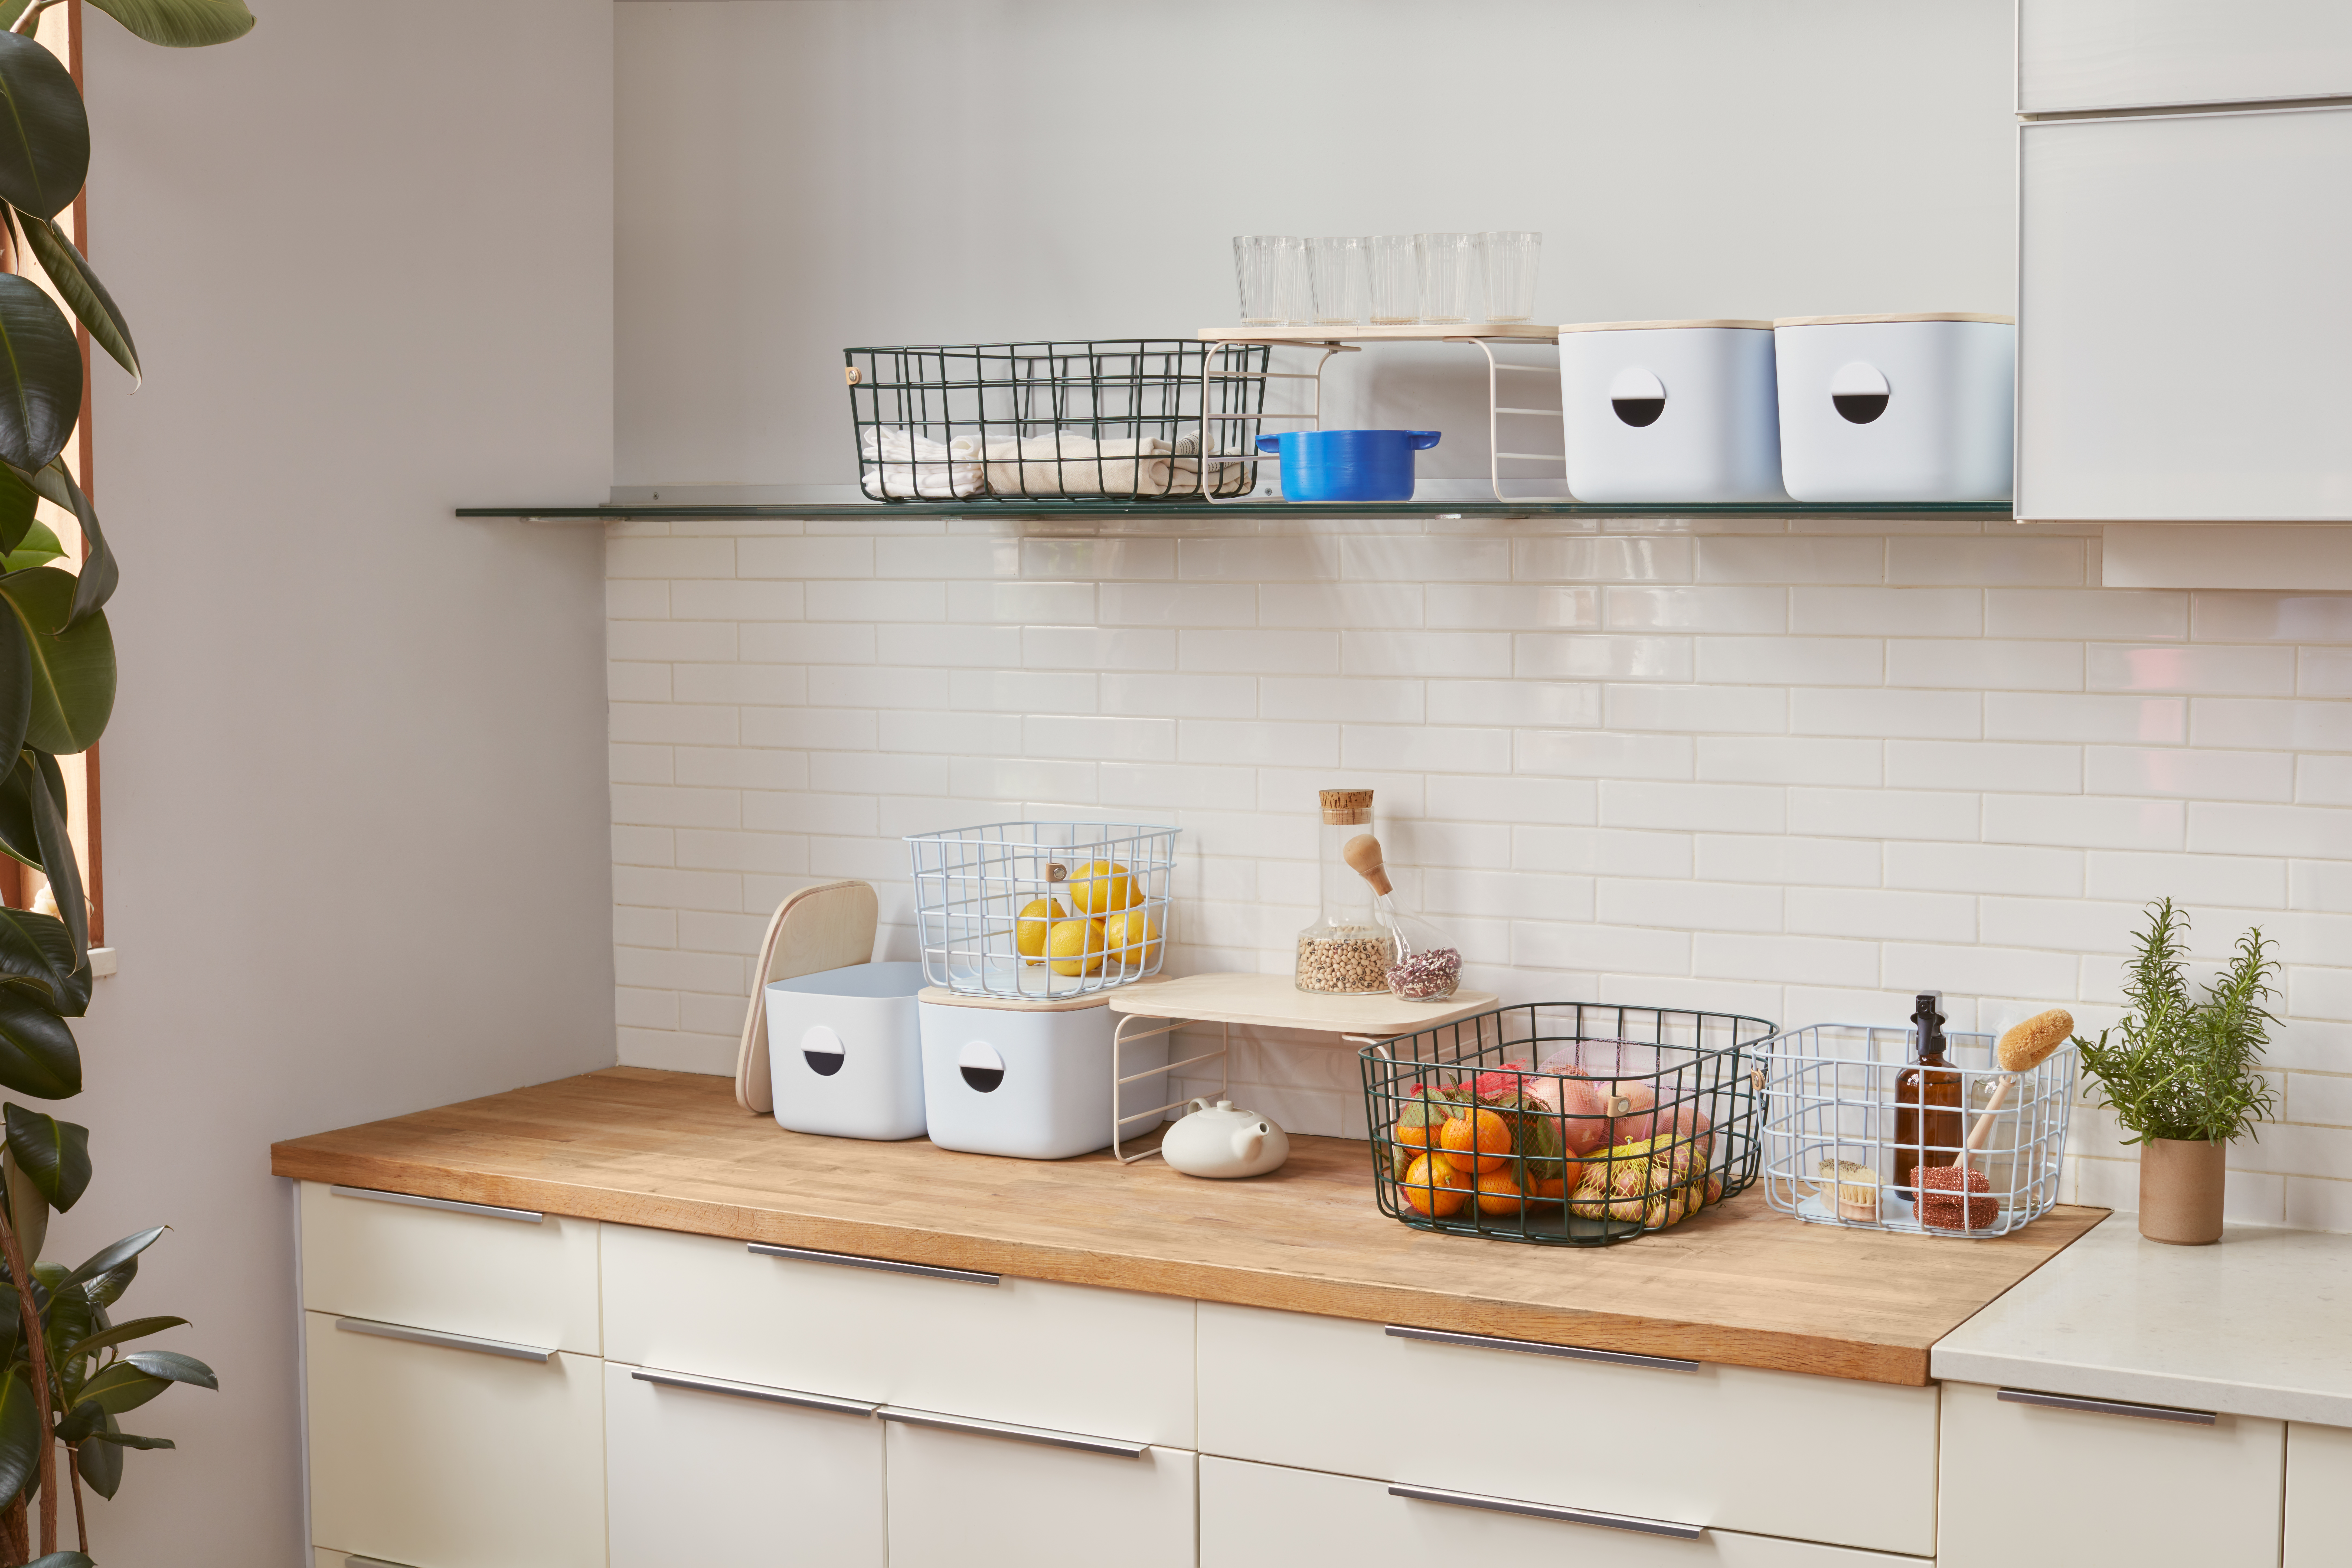 Storage containers on kitchen counters.